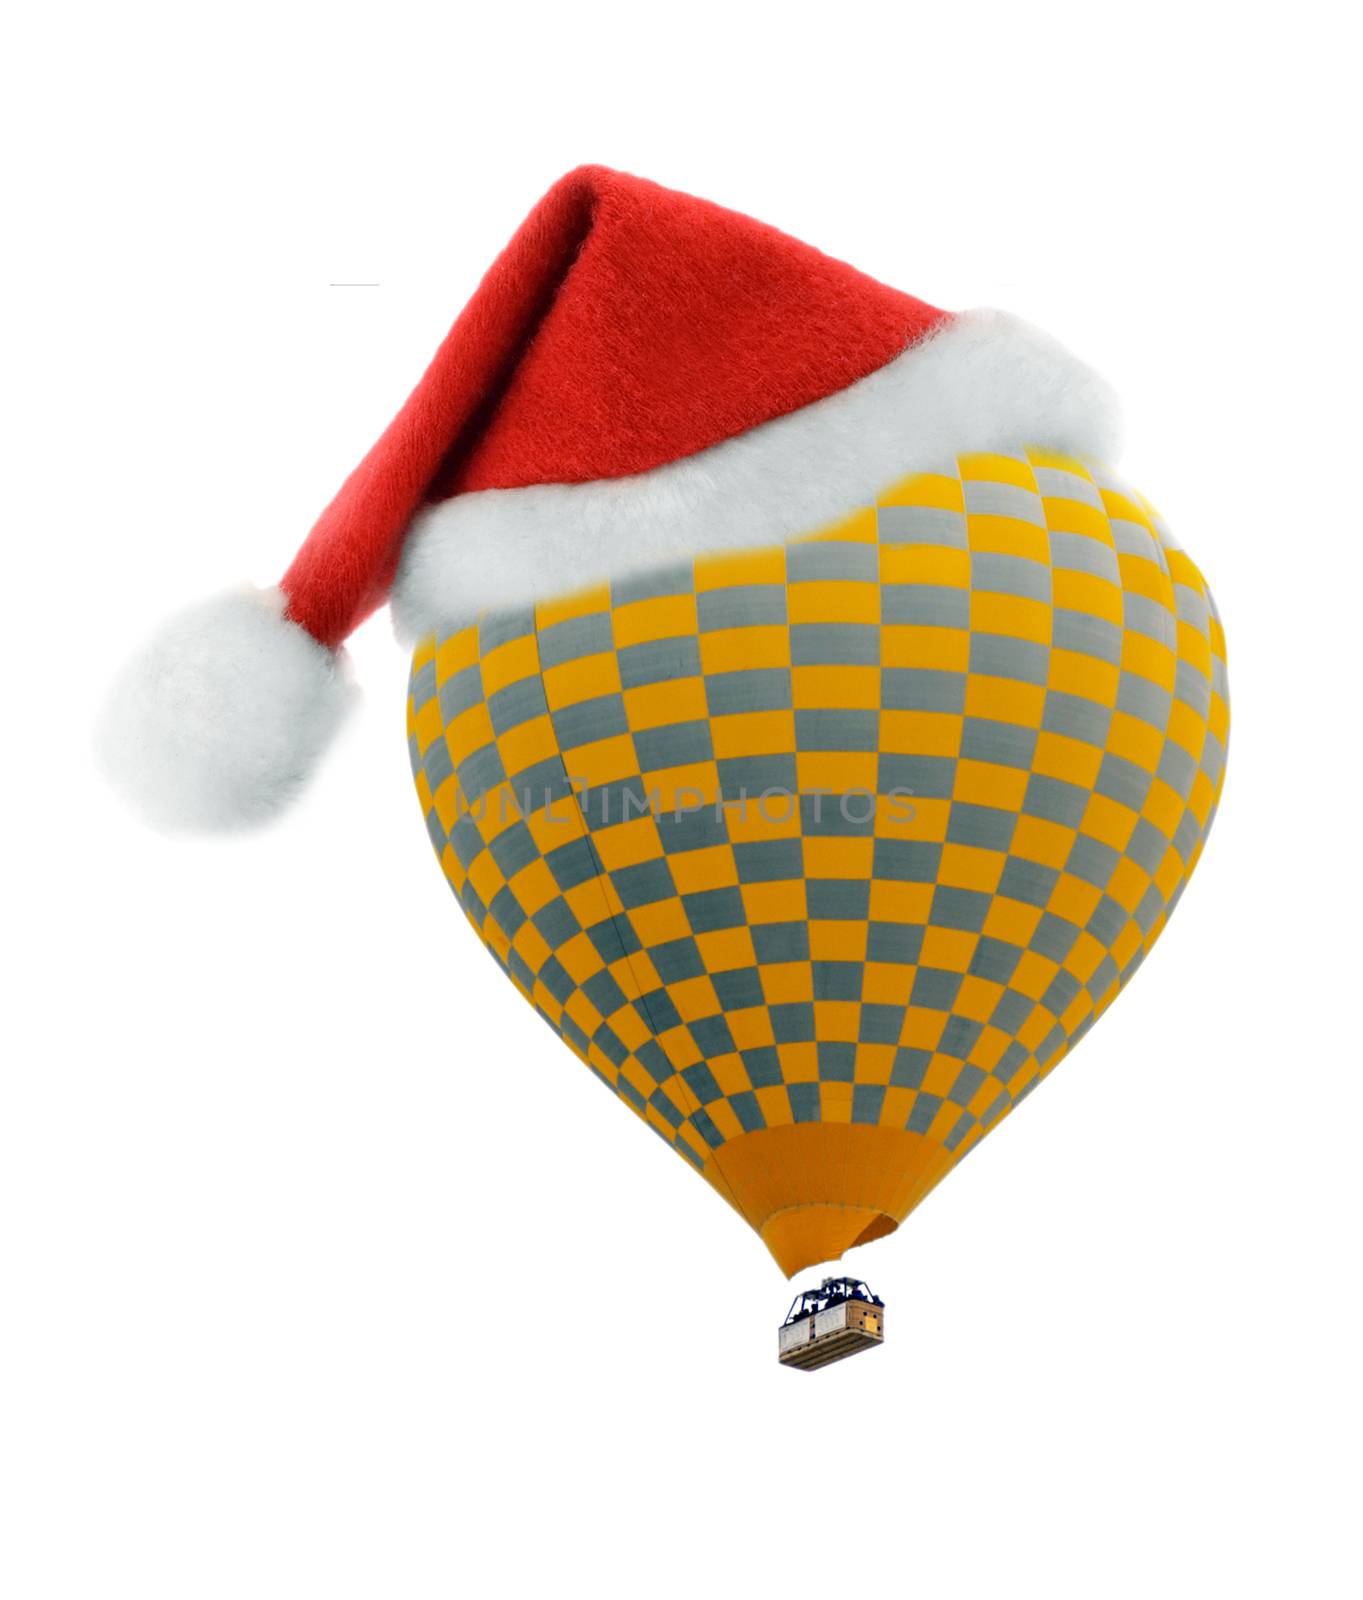 Red Santa hat on Hot air xmas balloon isolated on white background